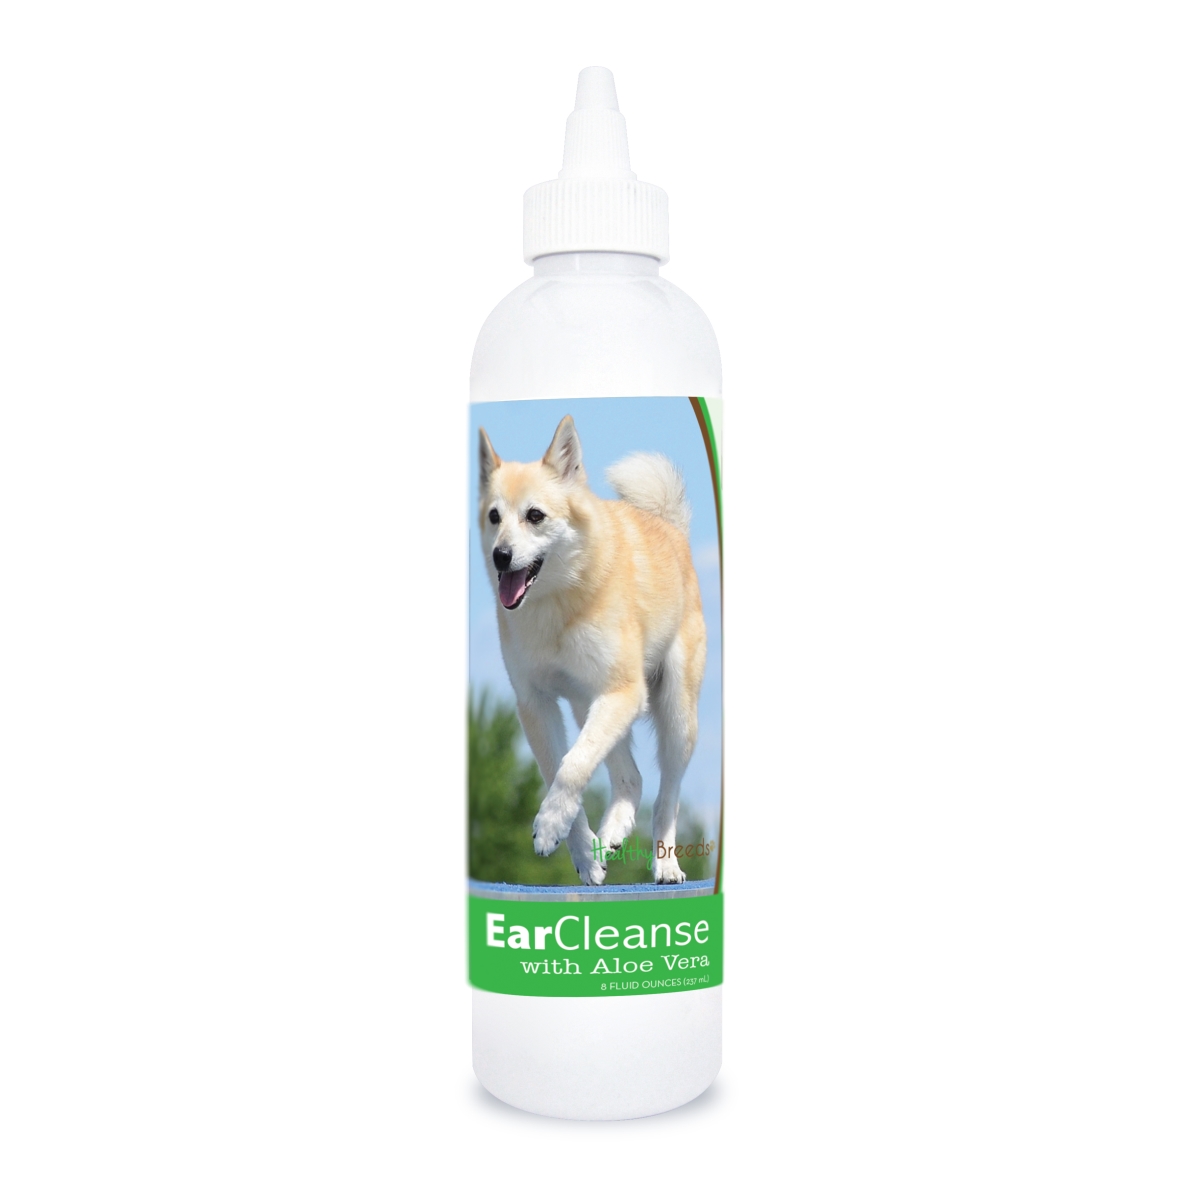 Picture of Healthy Breeds 840235196808 8 oz Norwegian Buhund Ear Cleanse with Aloe Vera Cucumber Melon